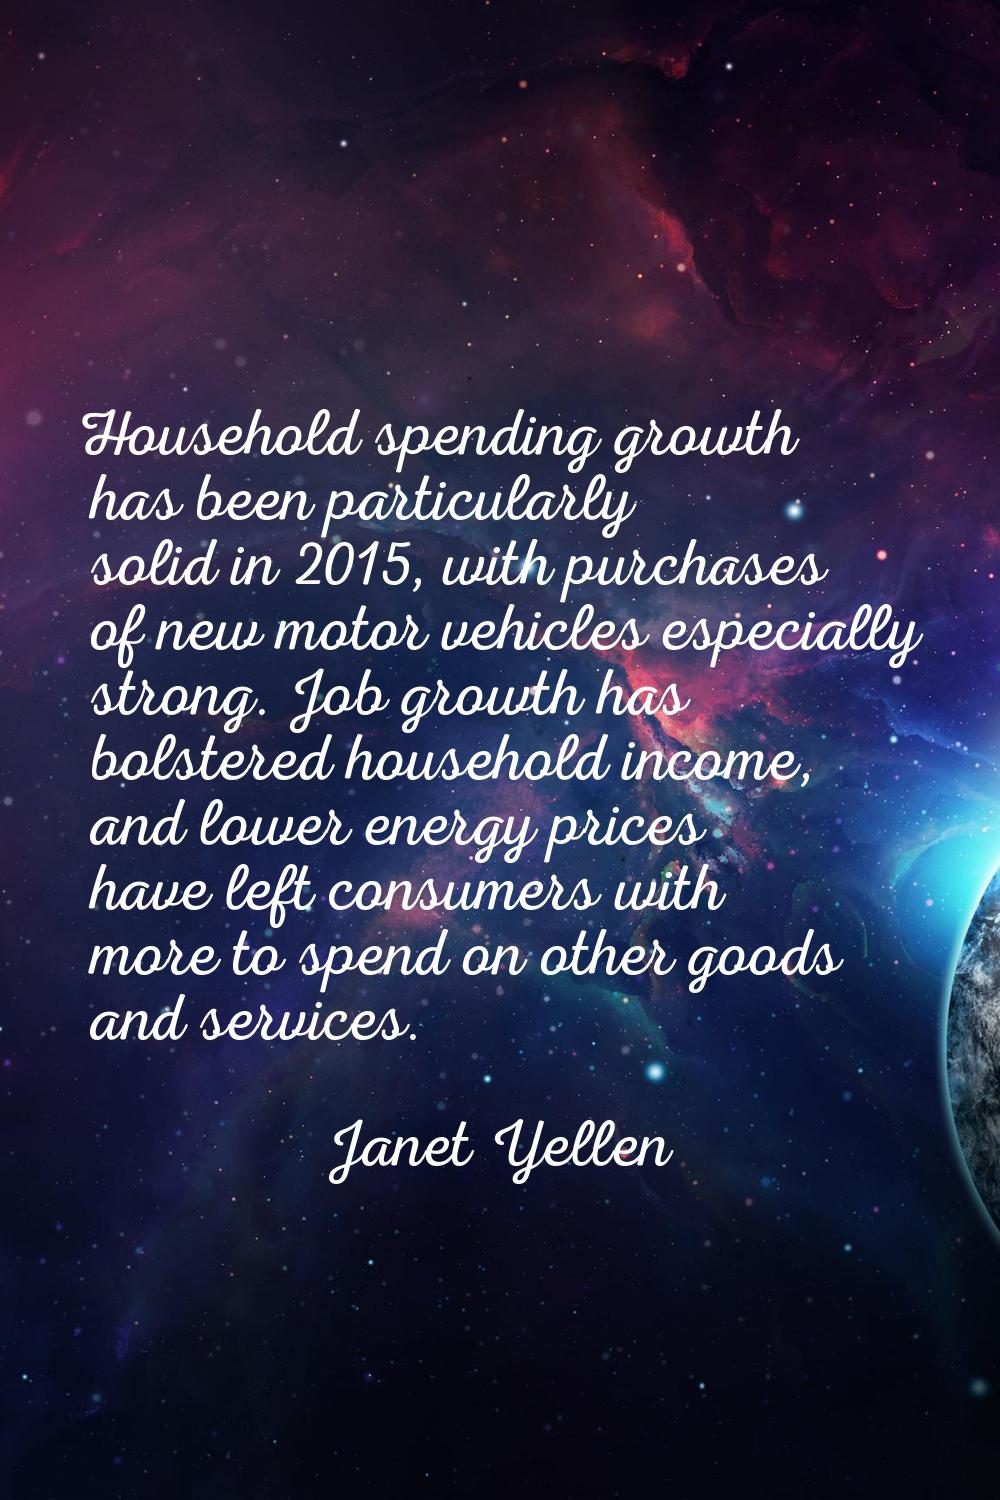 Household spending growth has been particularly solid in 2015, with purchases of new motor vehicles